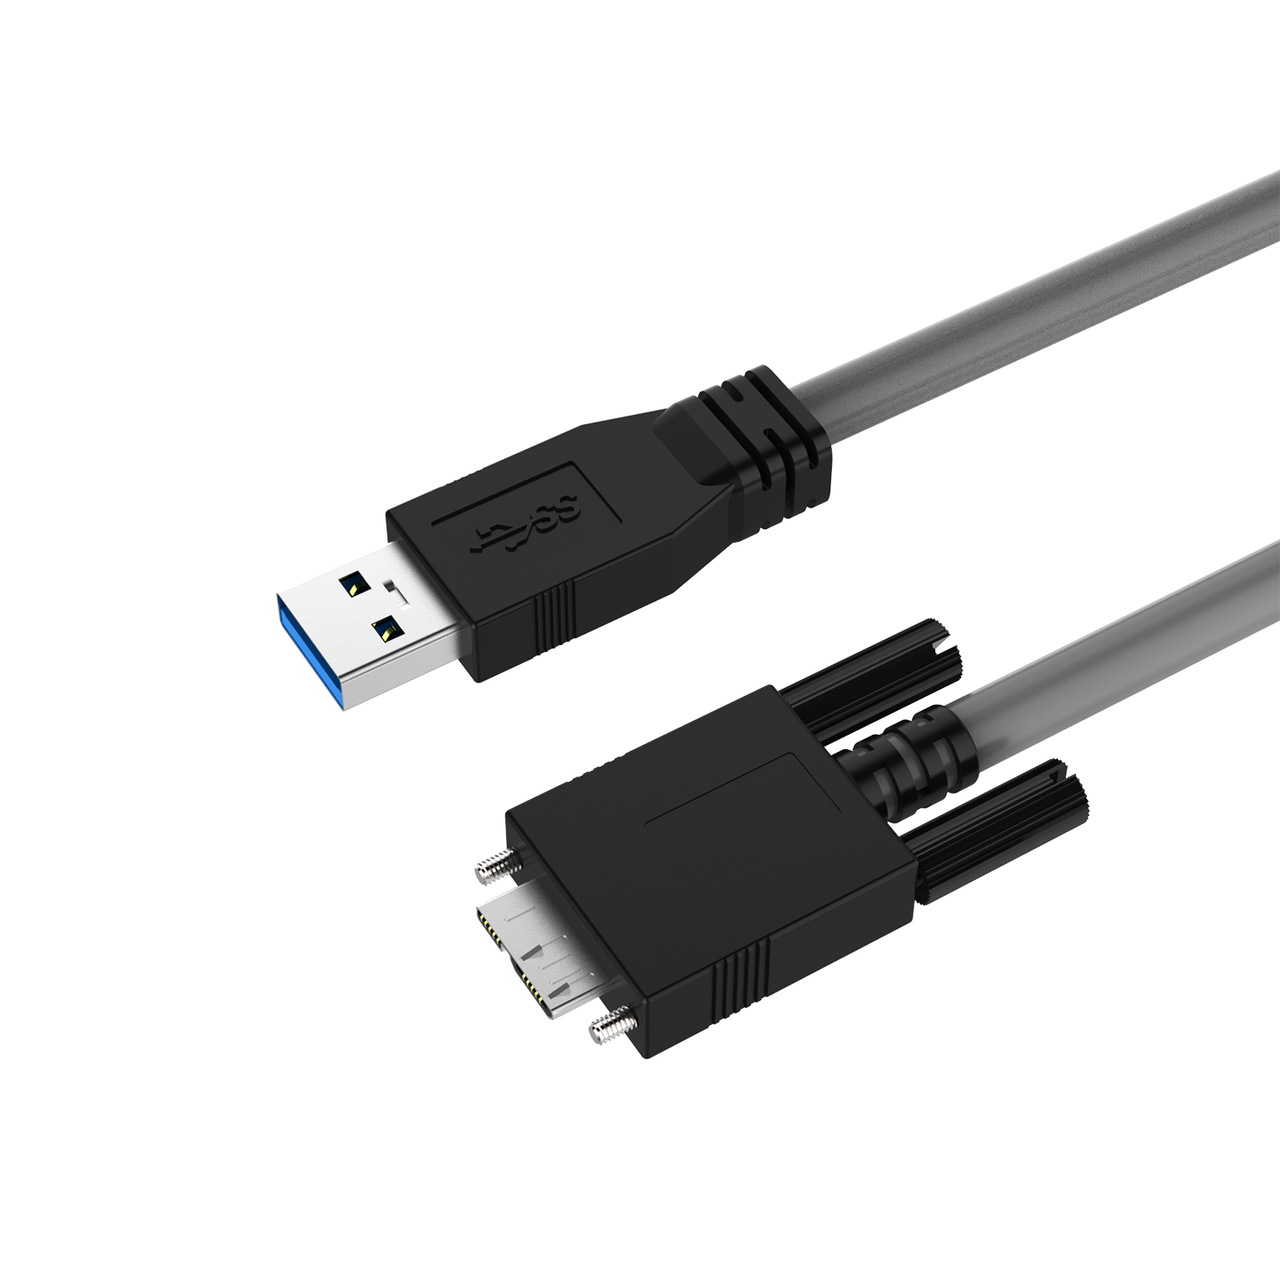 genert Michelangelo reference NTC | High Flex USB 3.0 A Male to Micro B Male with M2 Screw Locking Cable